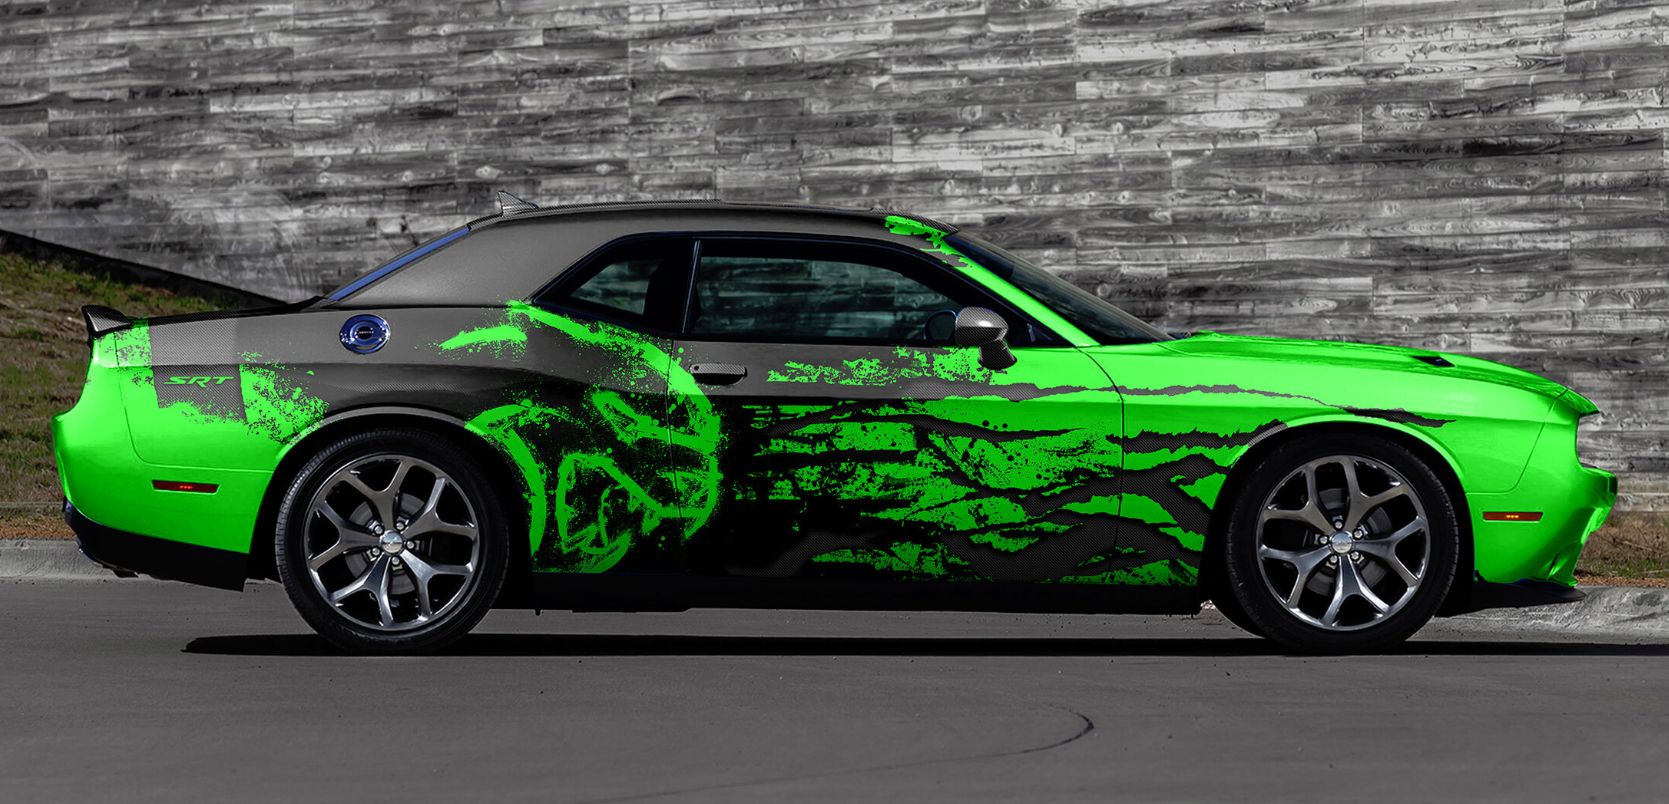 Are Car Wraps Durable?